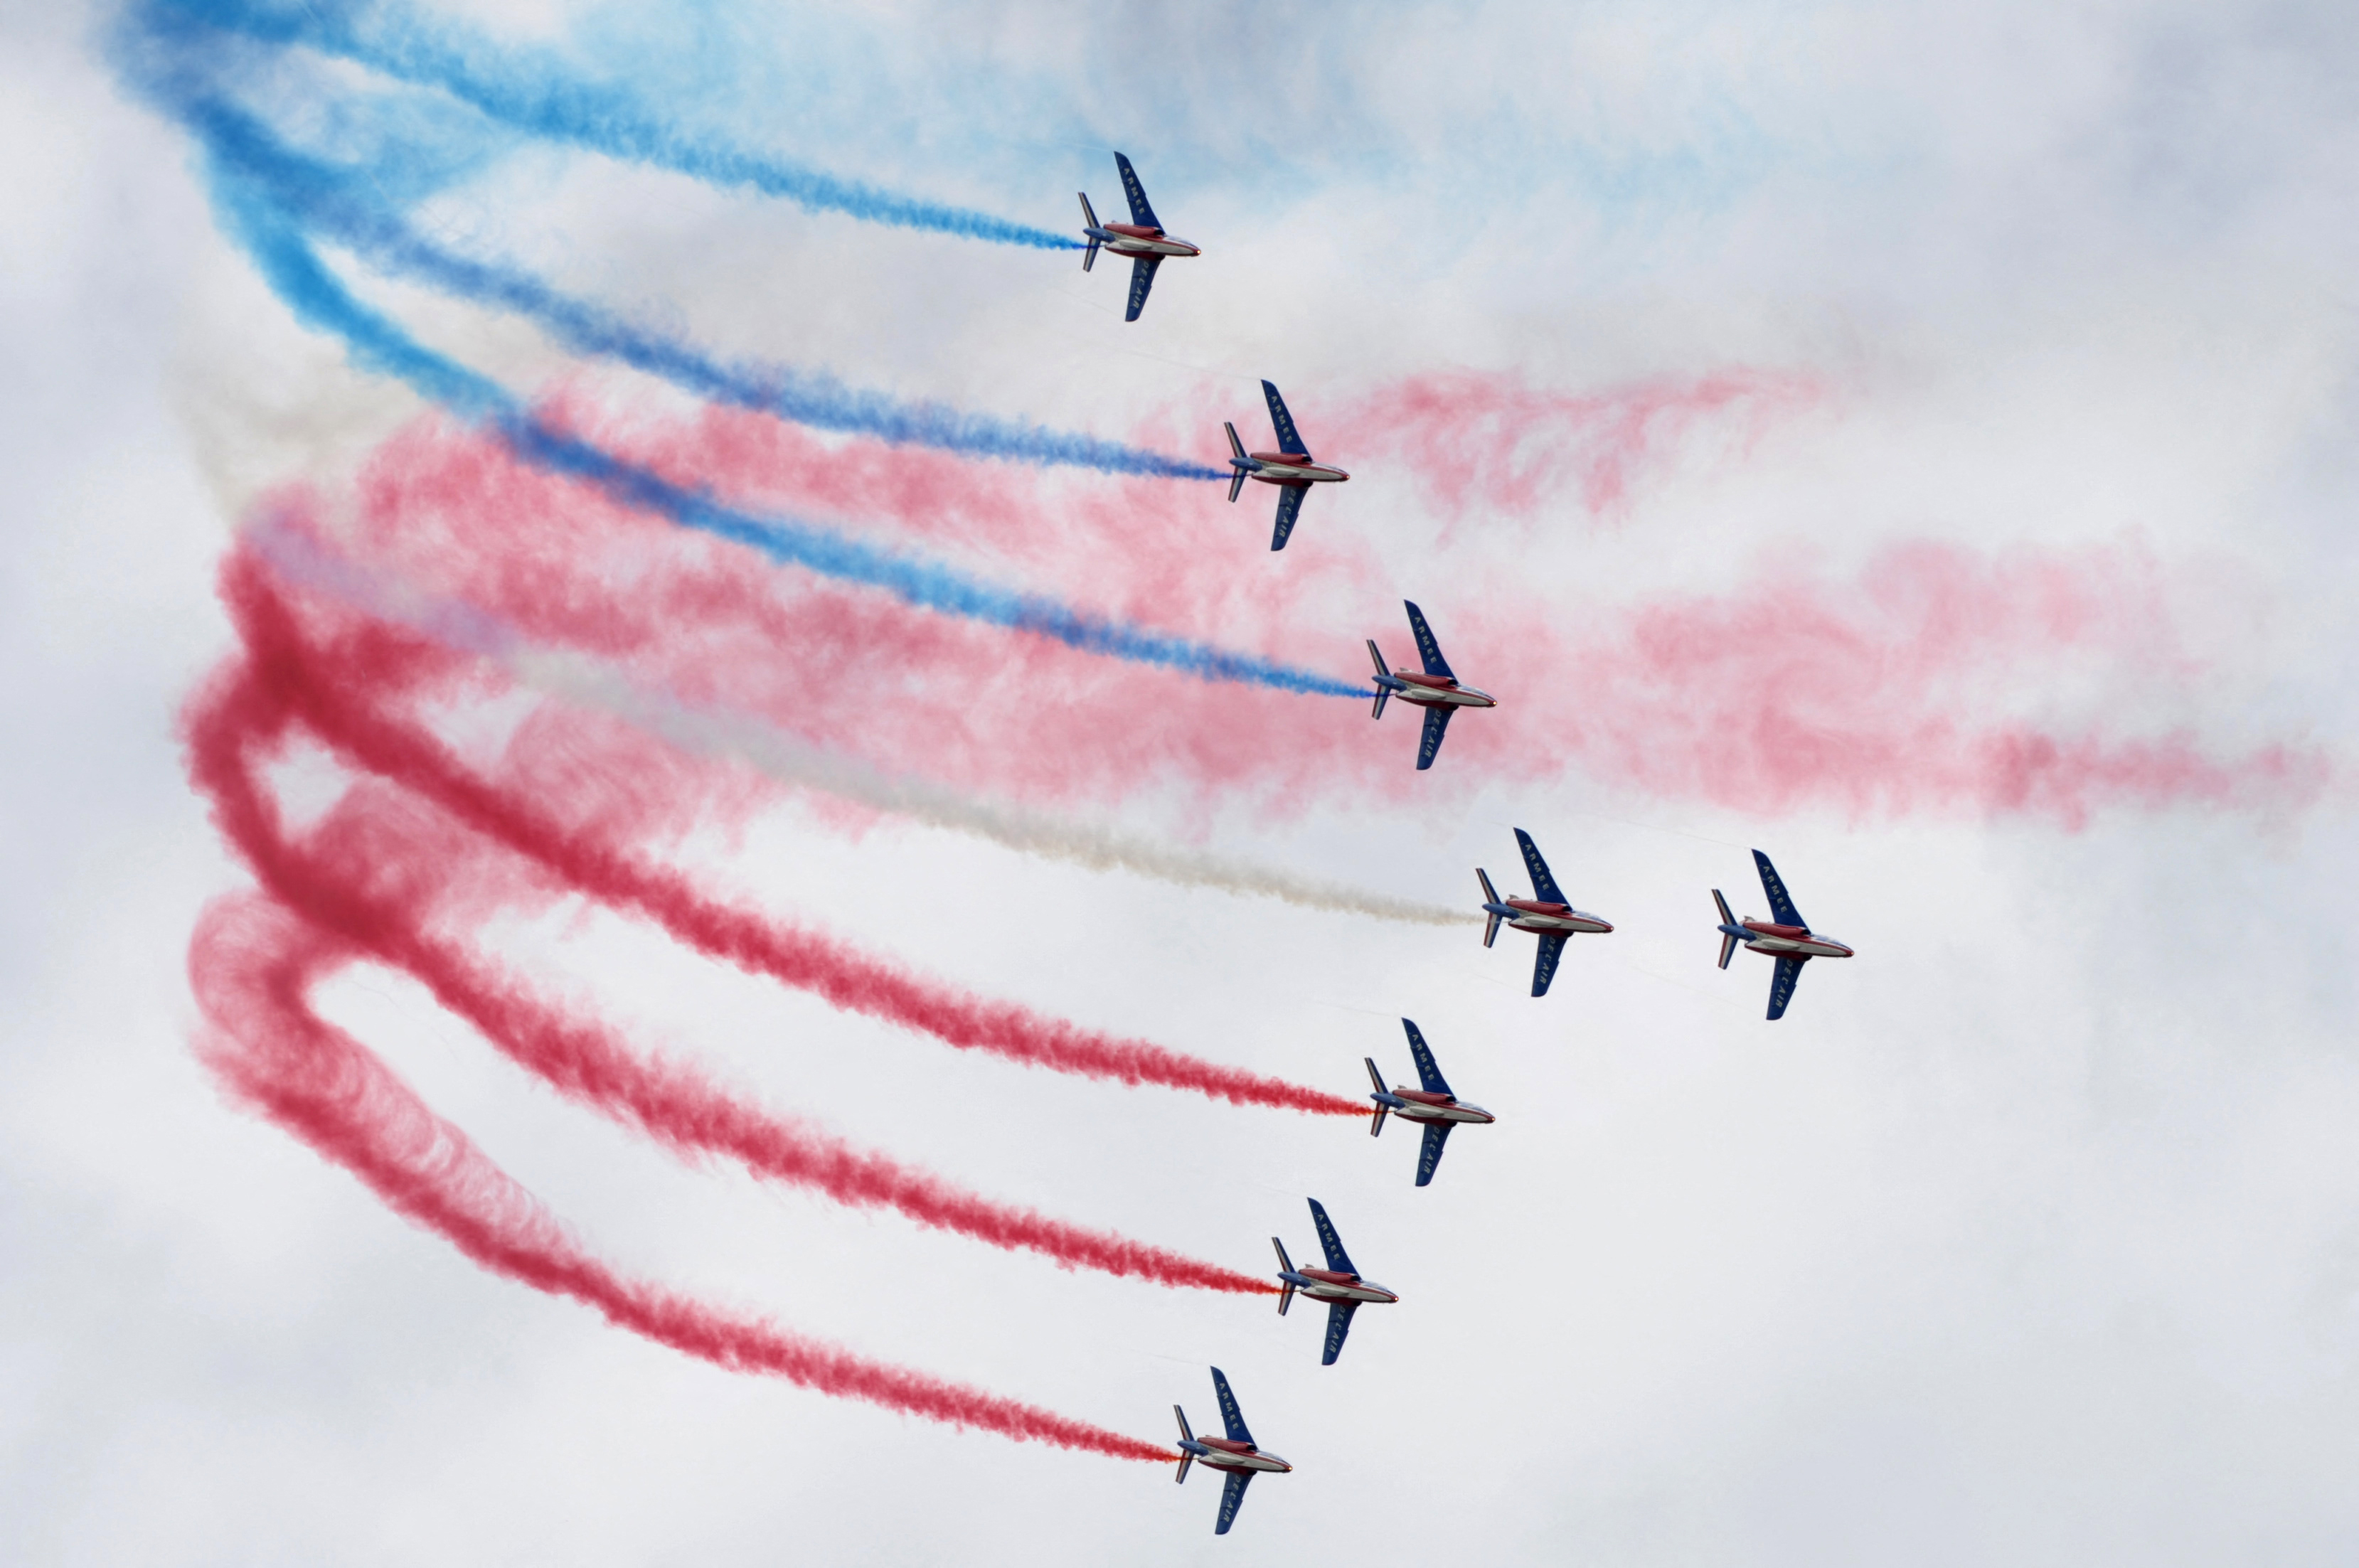 Planes release smoke in the colors of the French flag